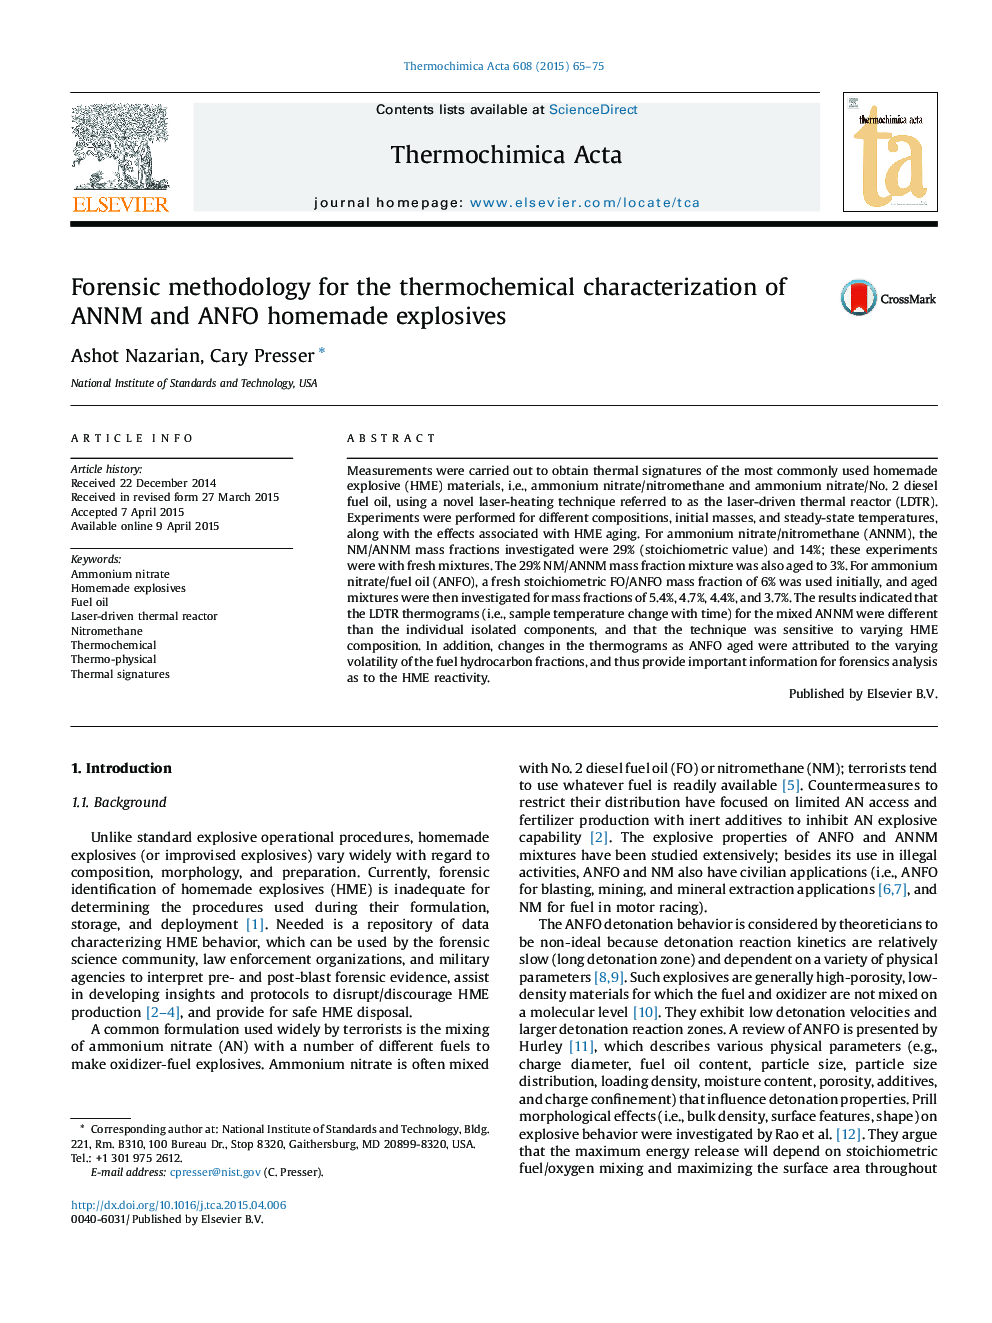 Forensic methodology for the thermochemical characterization of ANNM and ANFO homemade explosives